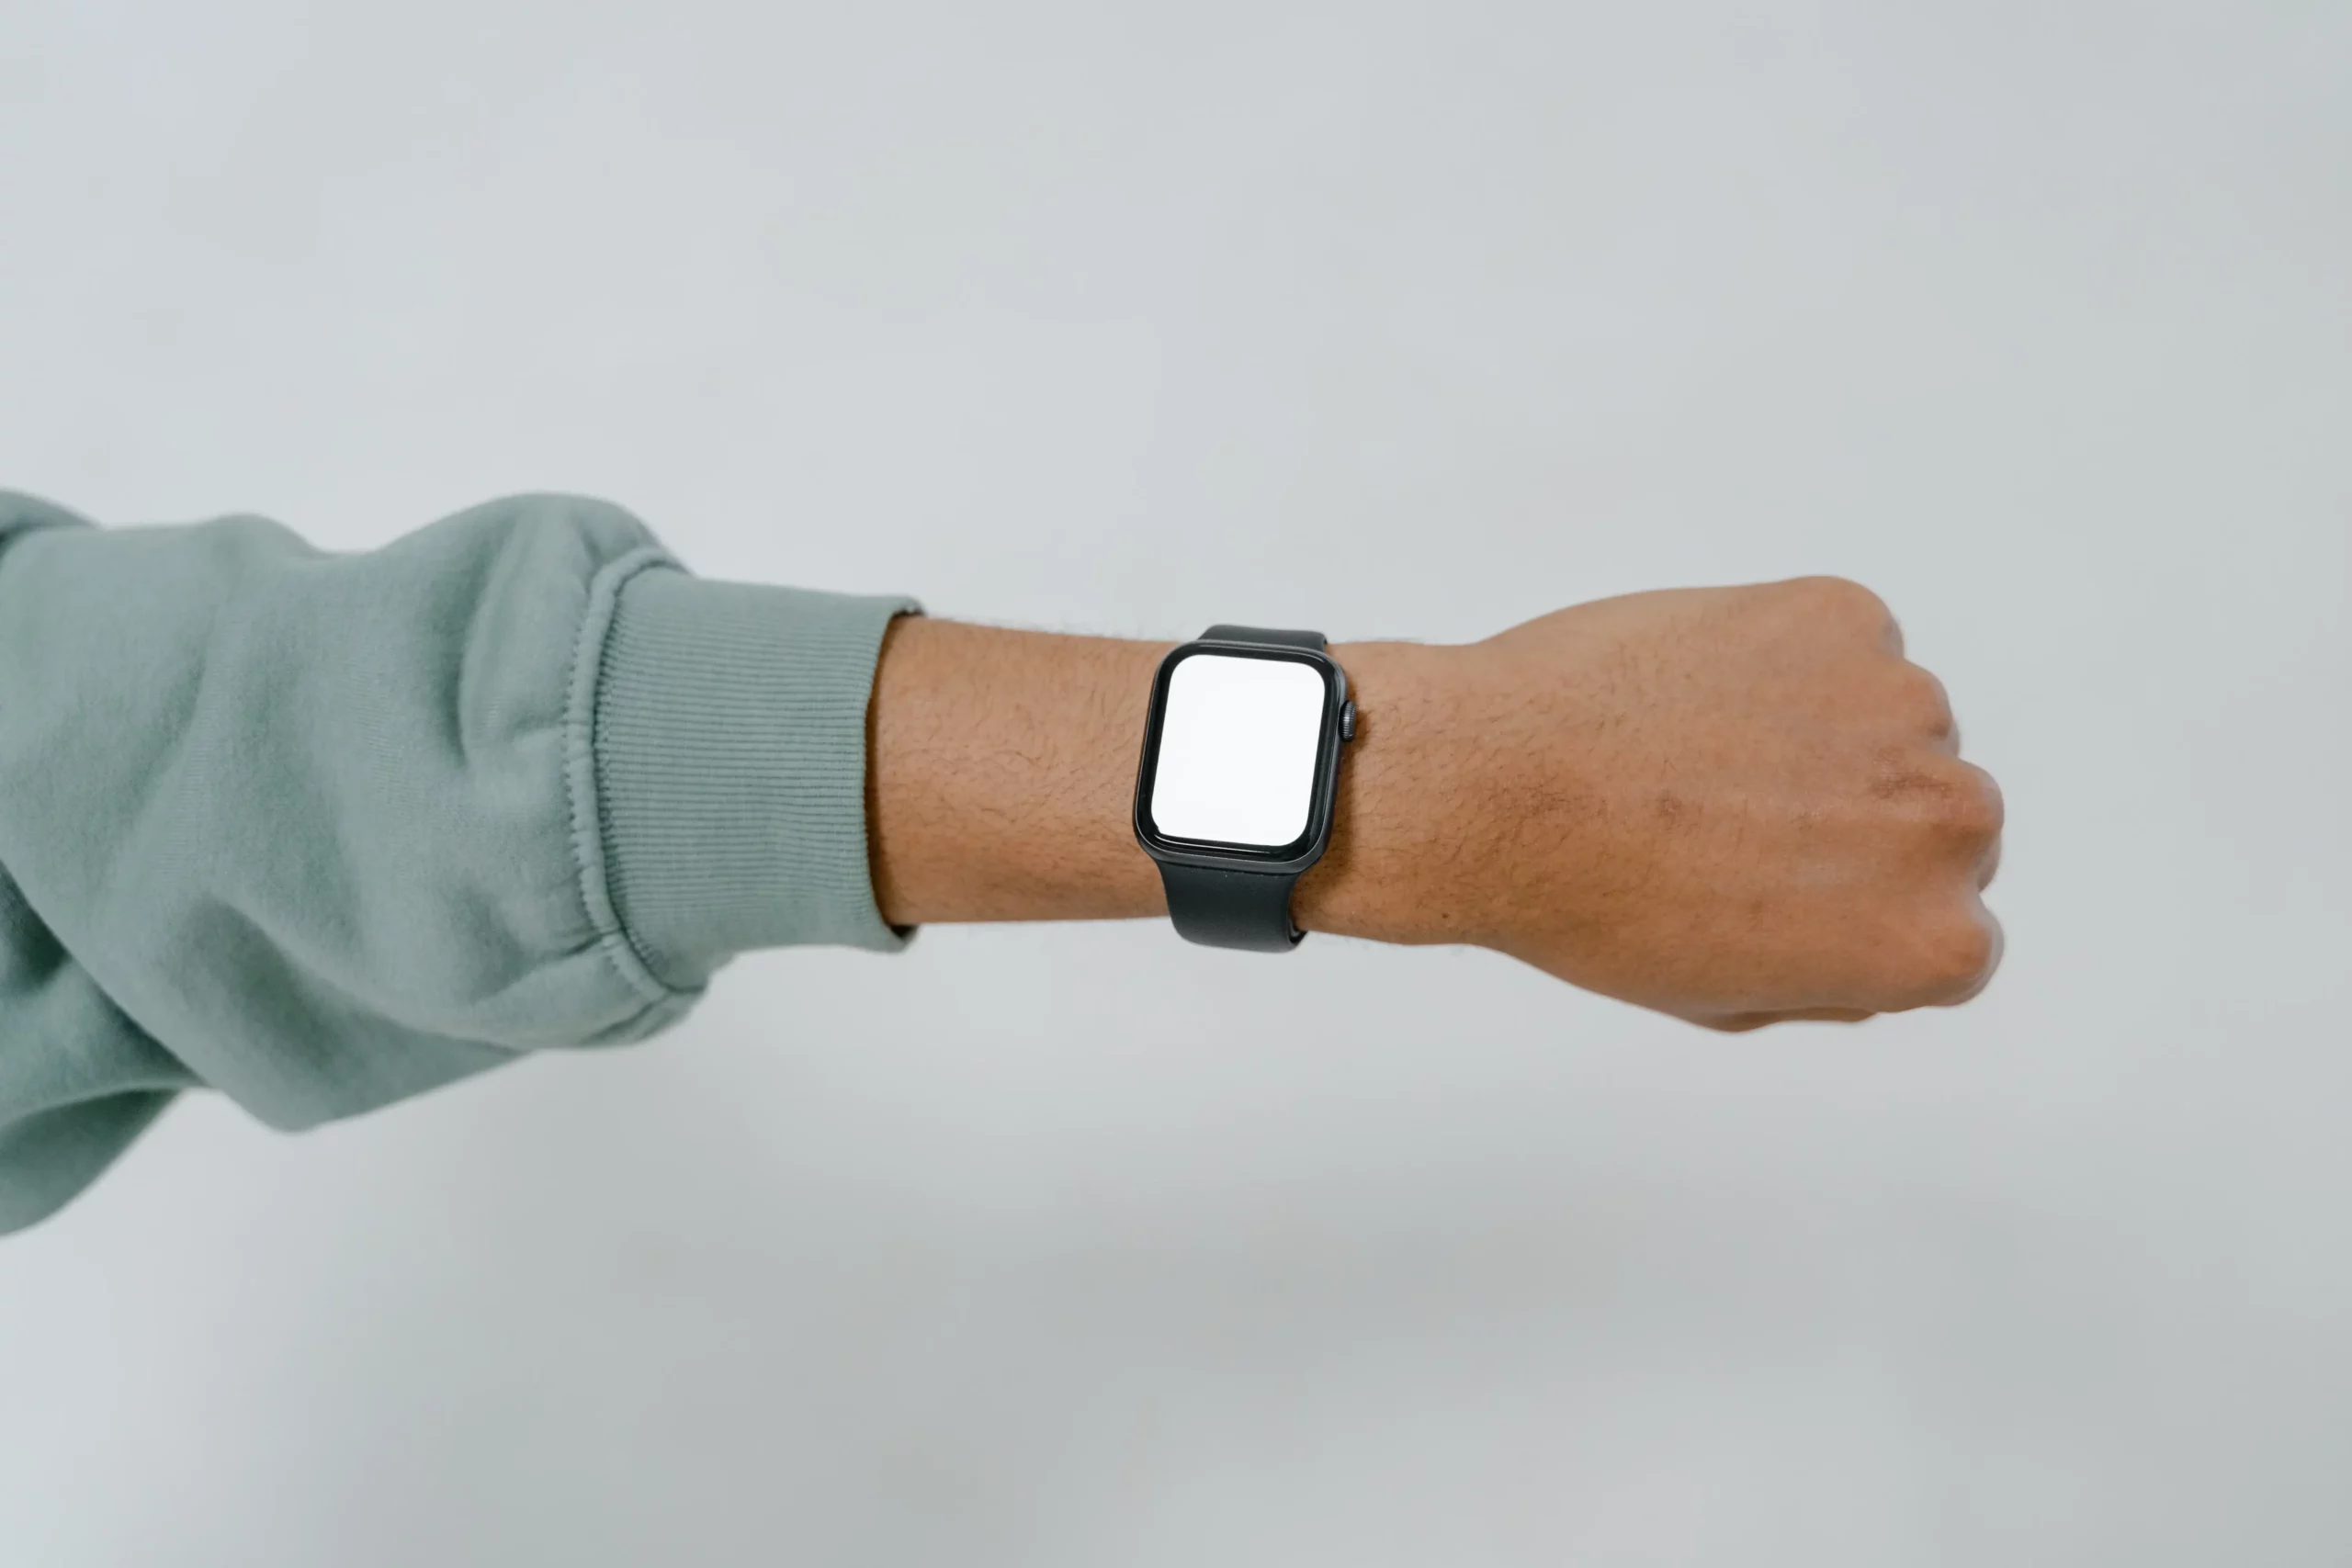 smartwatch market on wrist for showing symbol picture